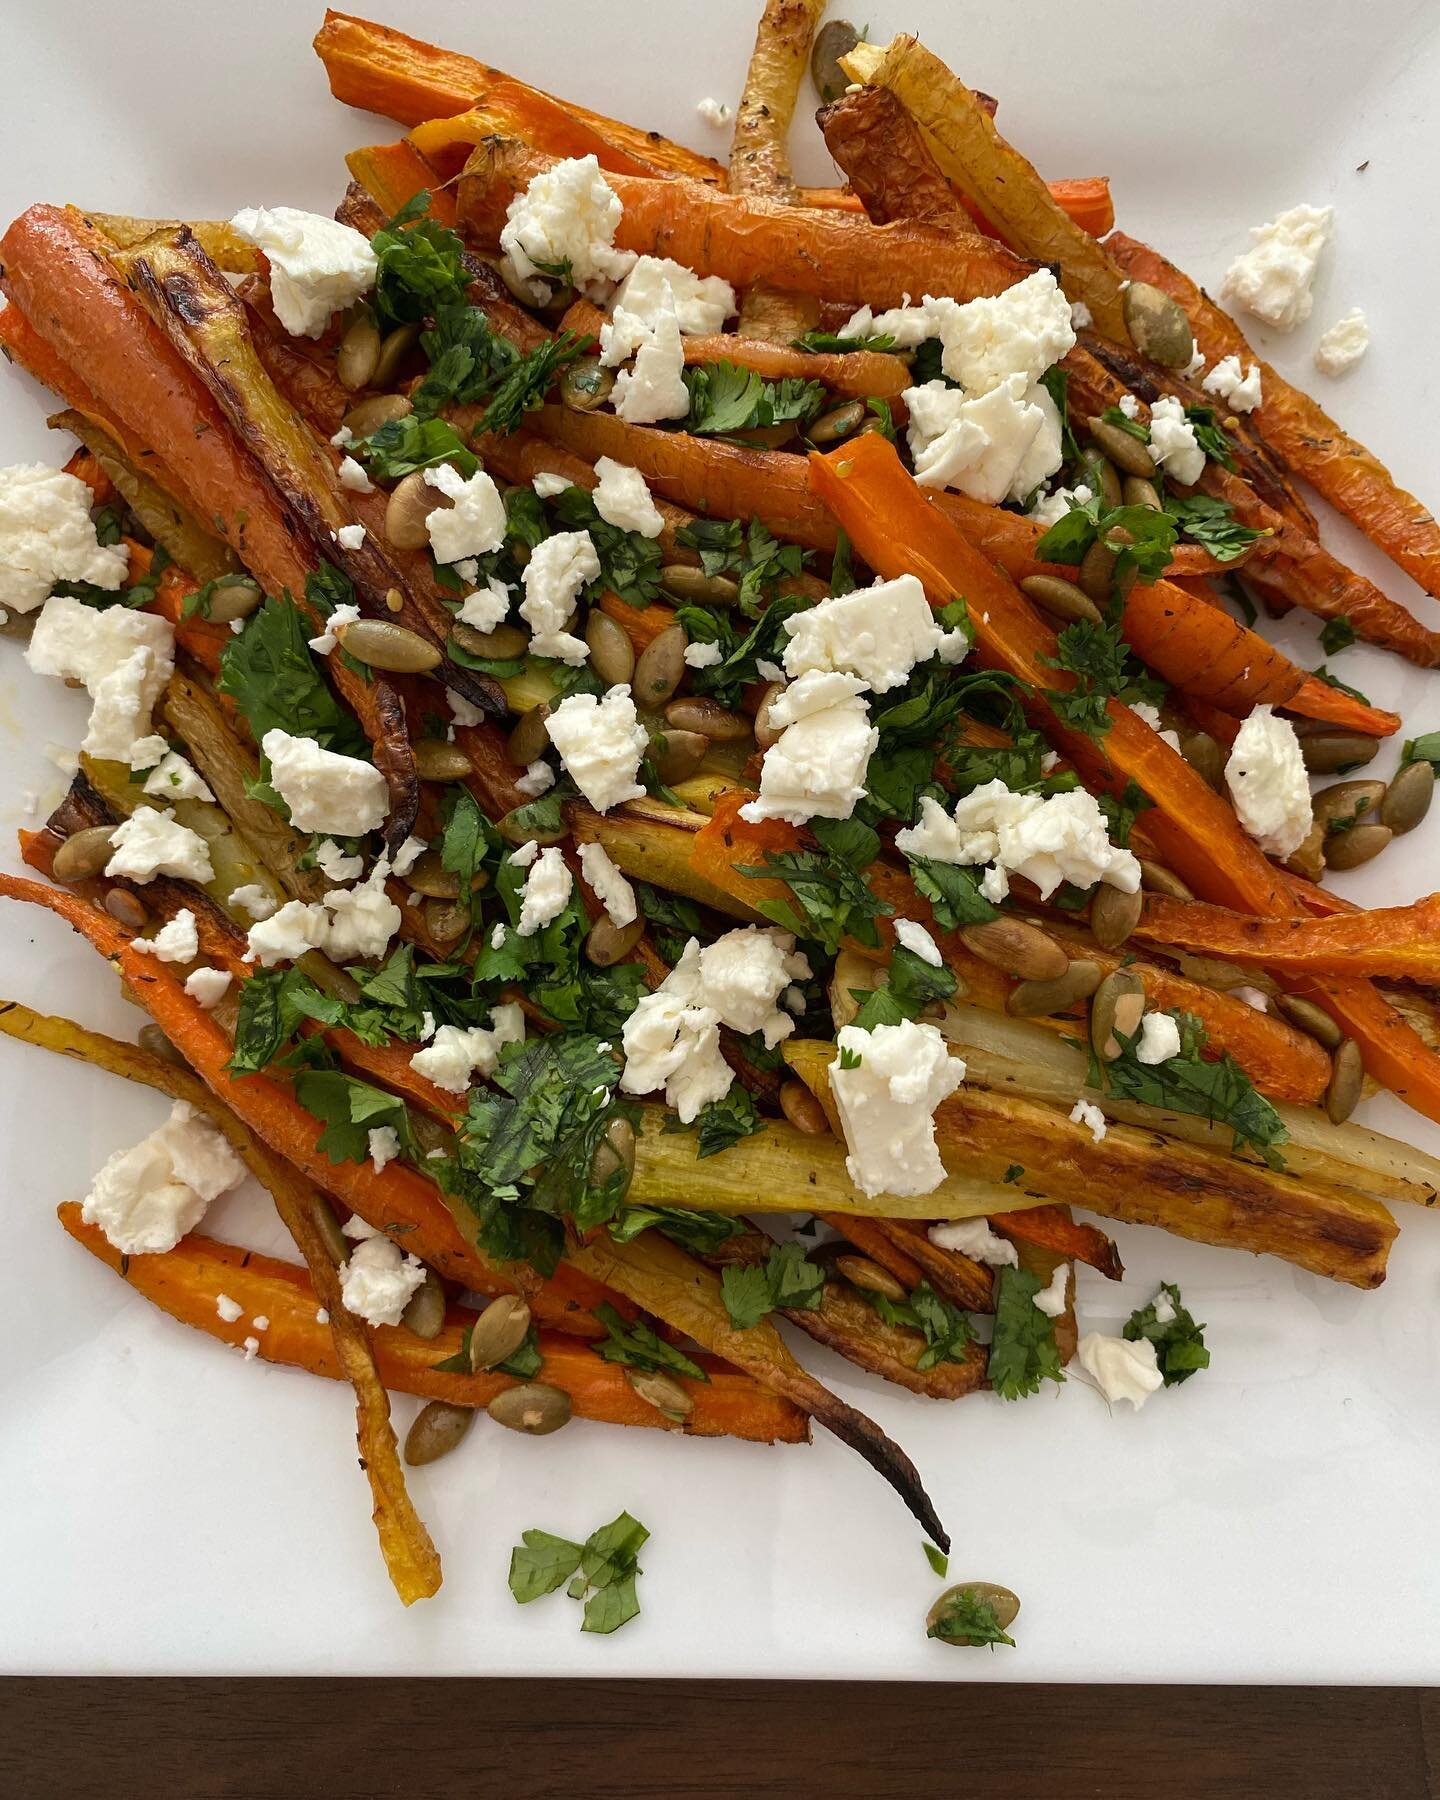 Roasted carrots with za&rsquo;atar, cilantro feta and toasted pumpkin seeds. Yum! 

Thank you @themodernproper for this easy tasty recipe!

Made this for Easter dinner but this will be in the rotation for weekday meals. 

Roasted veggies are a staple